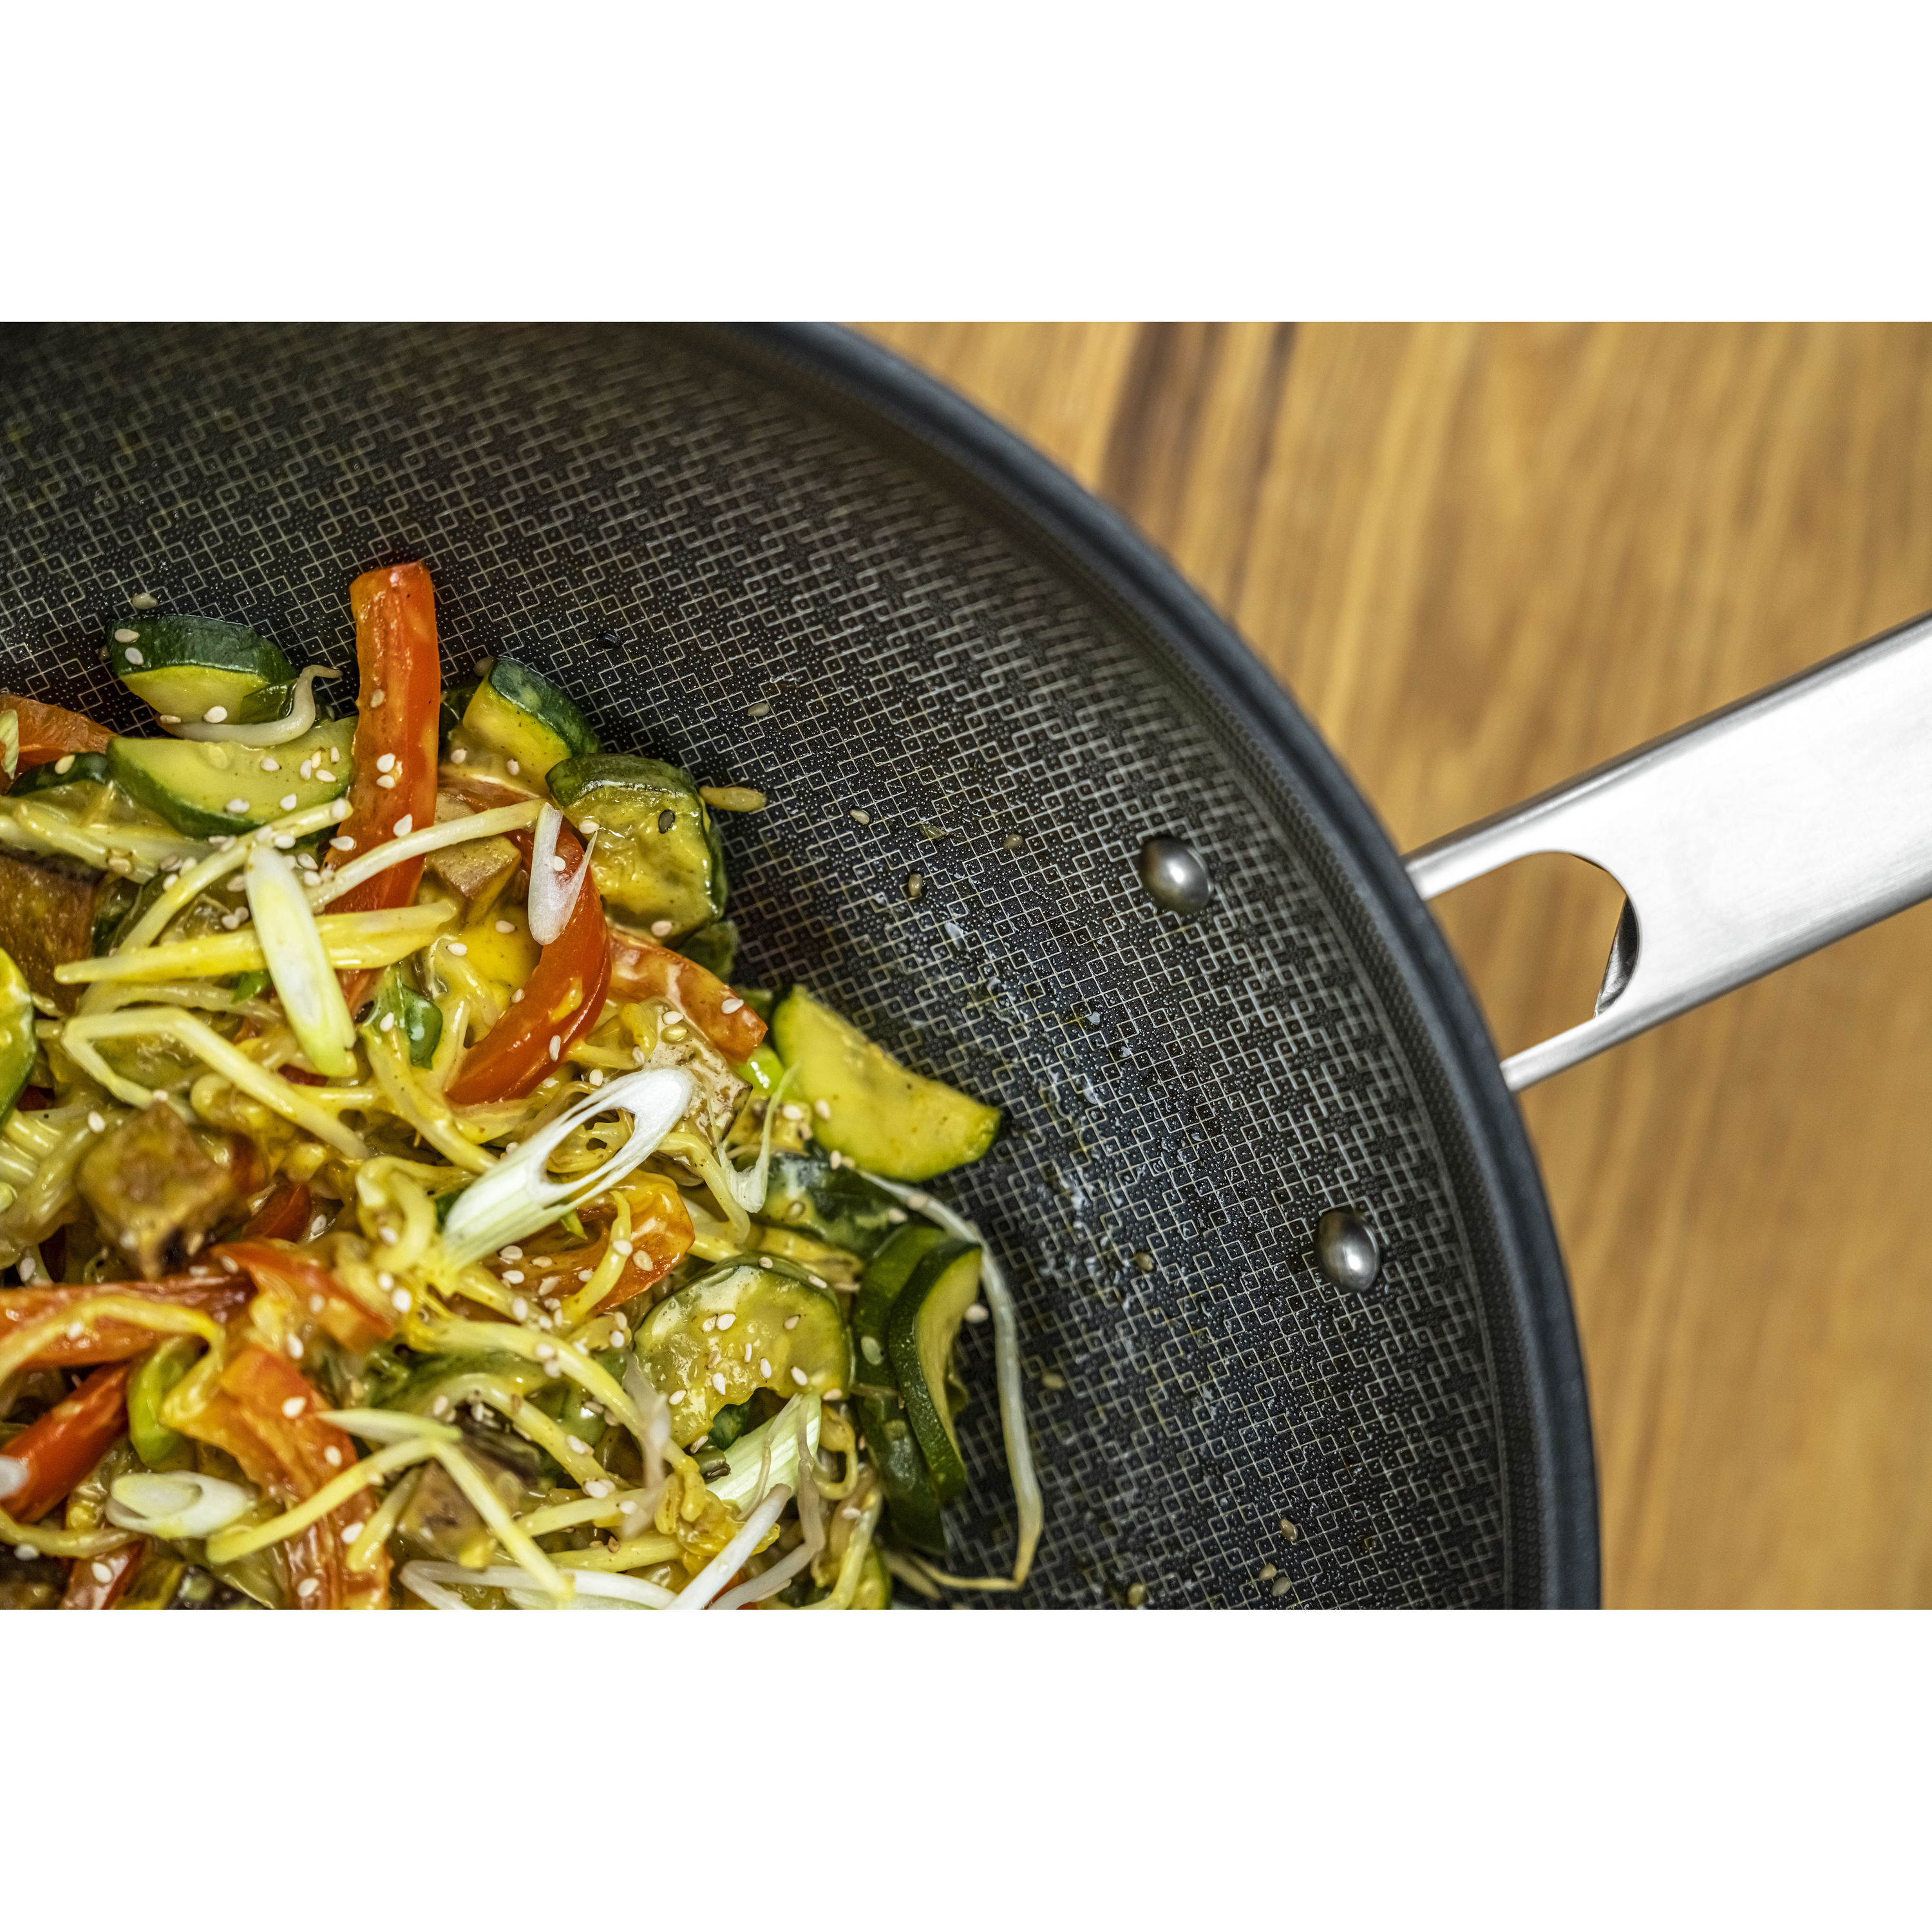 Superior Metal Finish Stir Fry Wok Style with Lid 